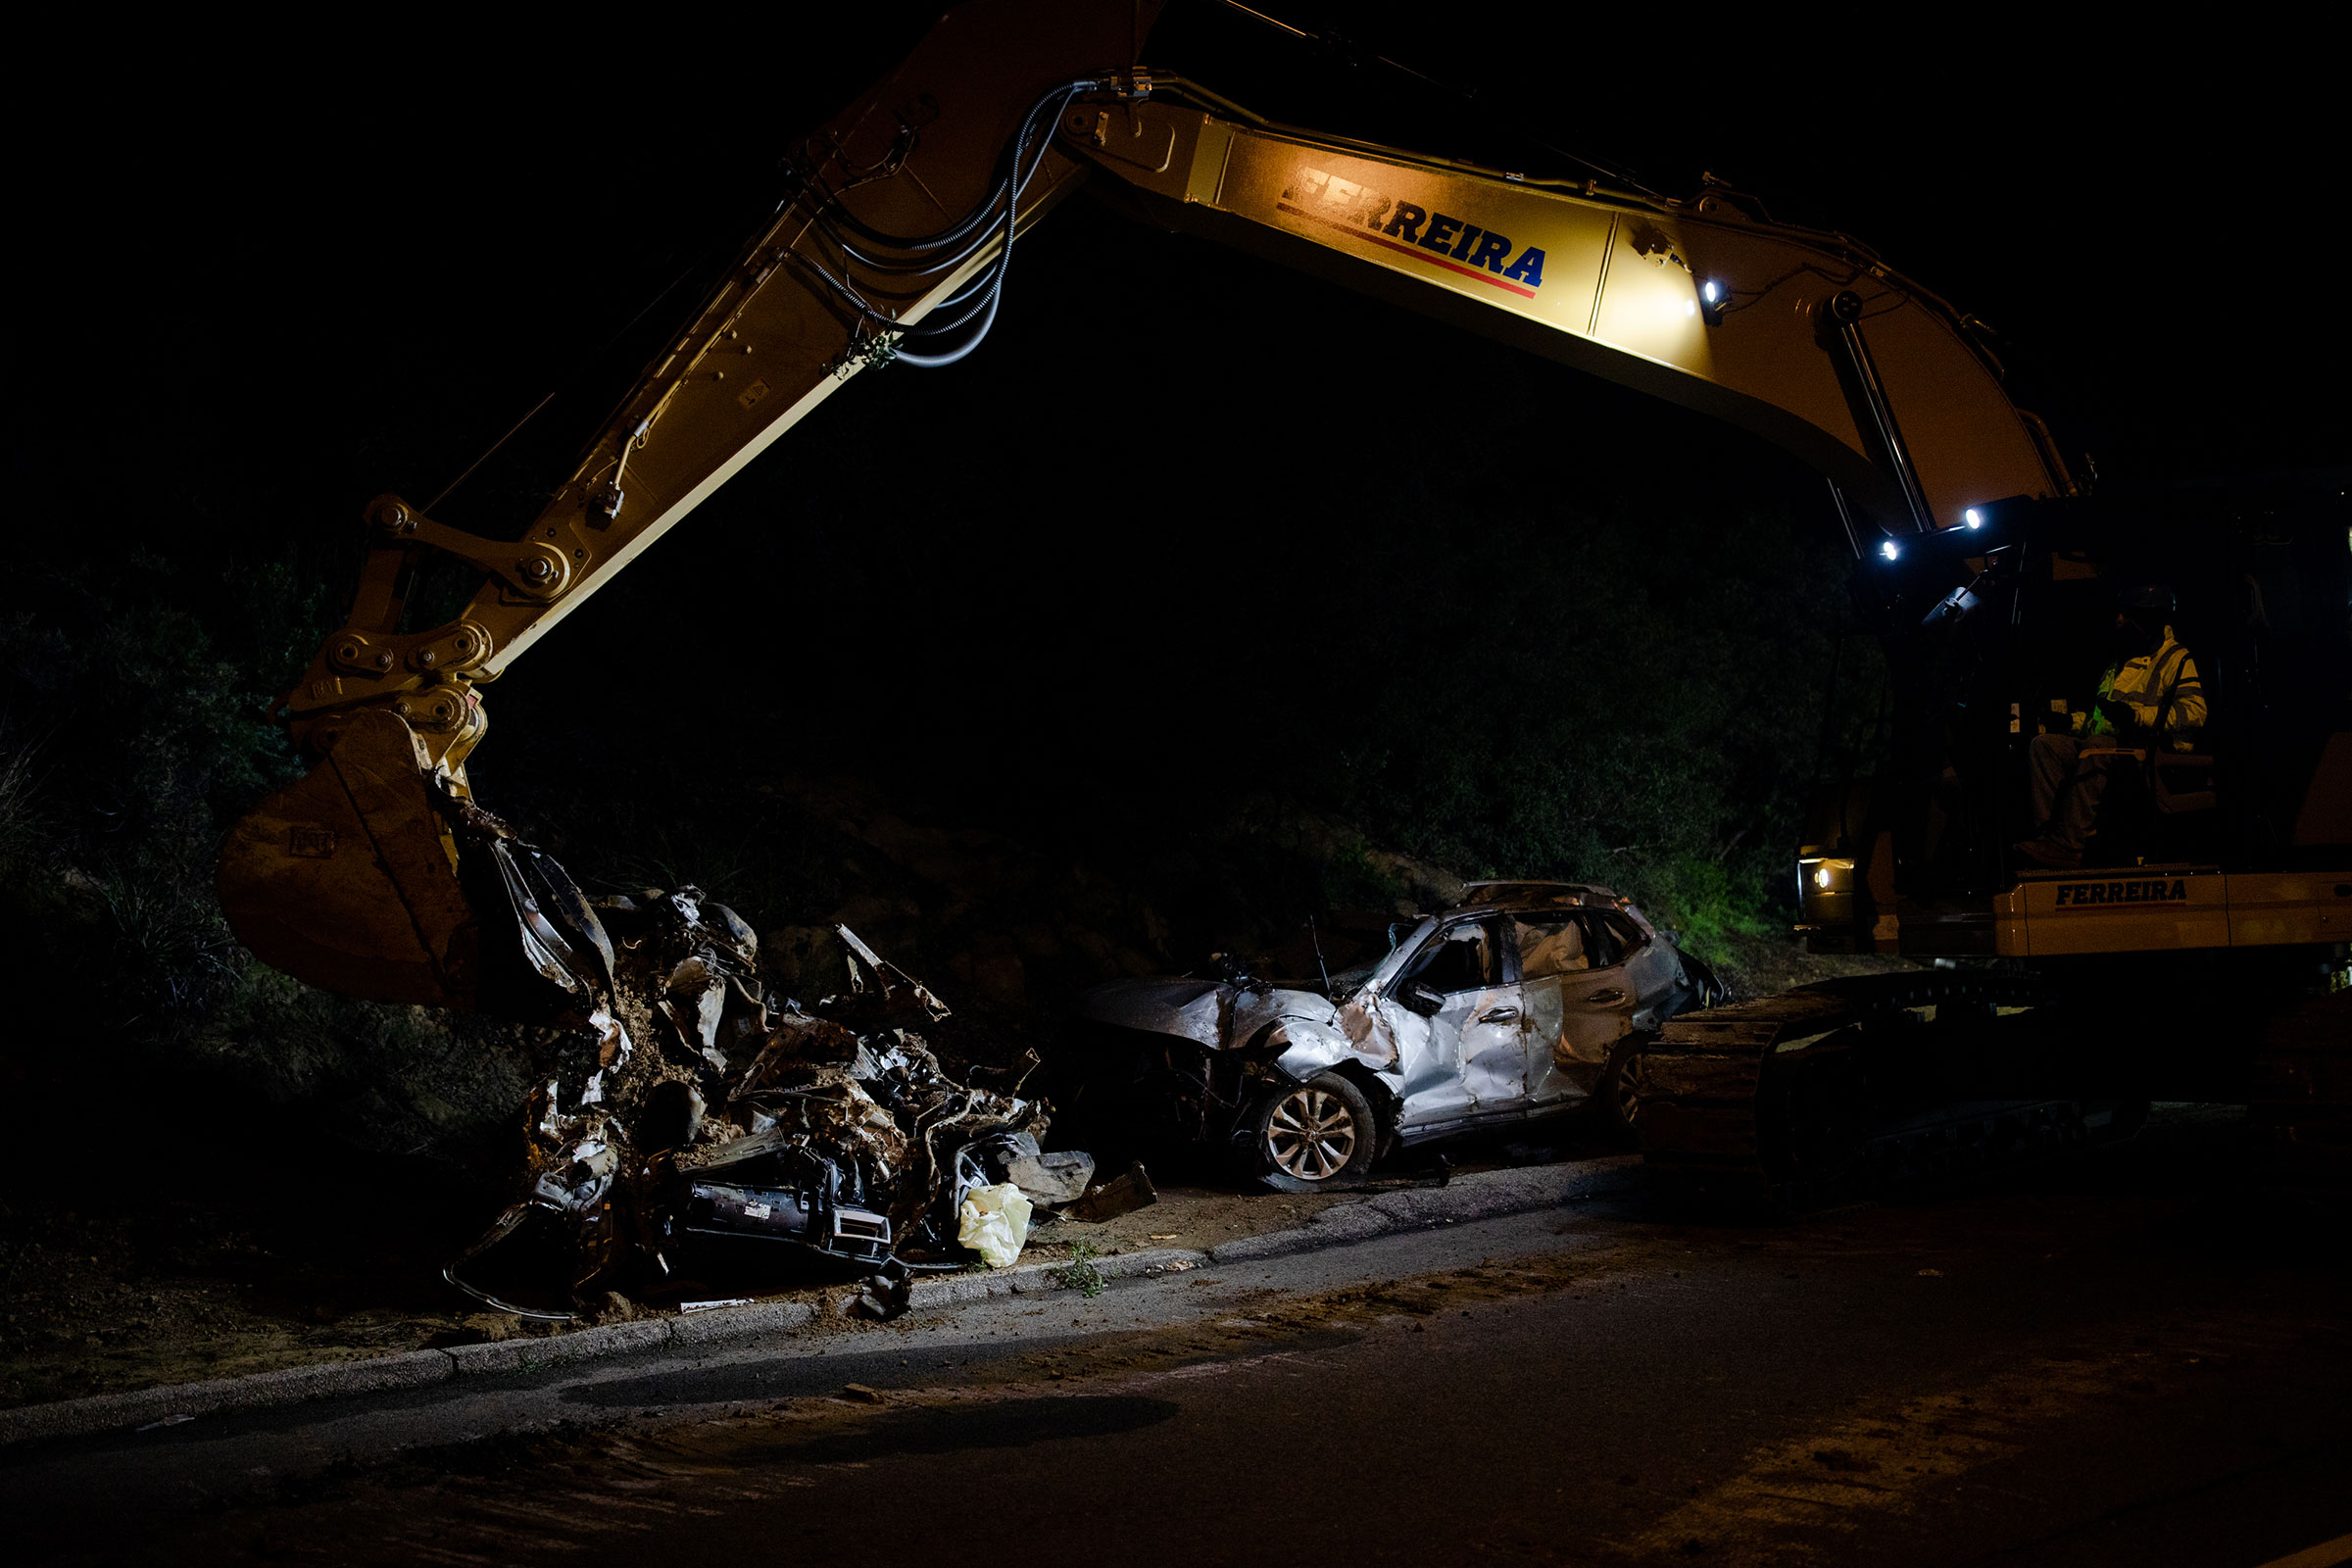 LOS ANGELES, CALIFORNIA - January 10th, 2023: Workers pull what remains of a car from a sinkhole that opened up in the Chatsworth neighborhood of Los Angeles.CREDIT: Alex Welsh for TIME